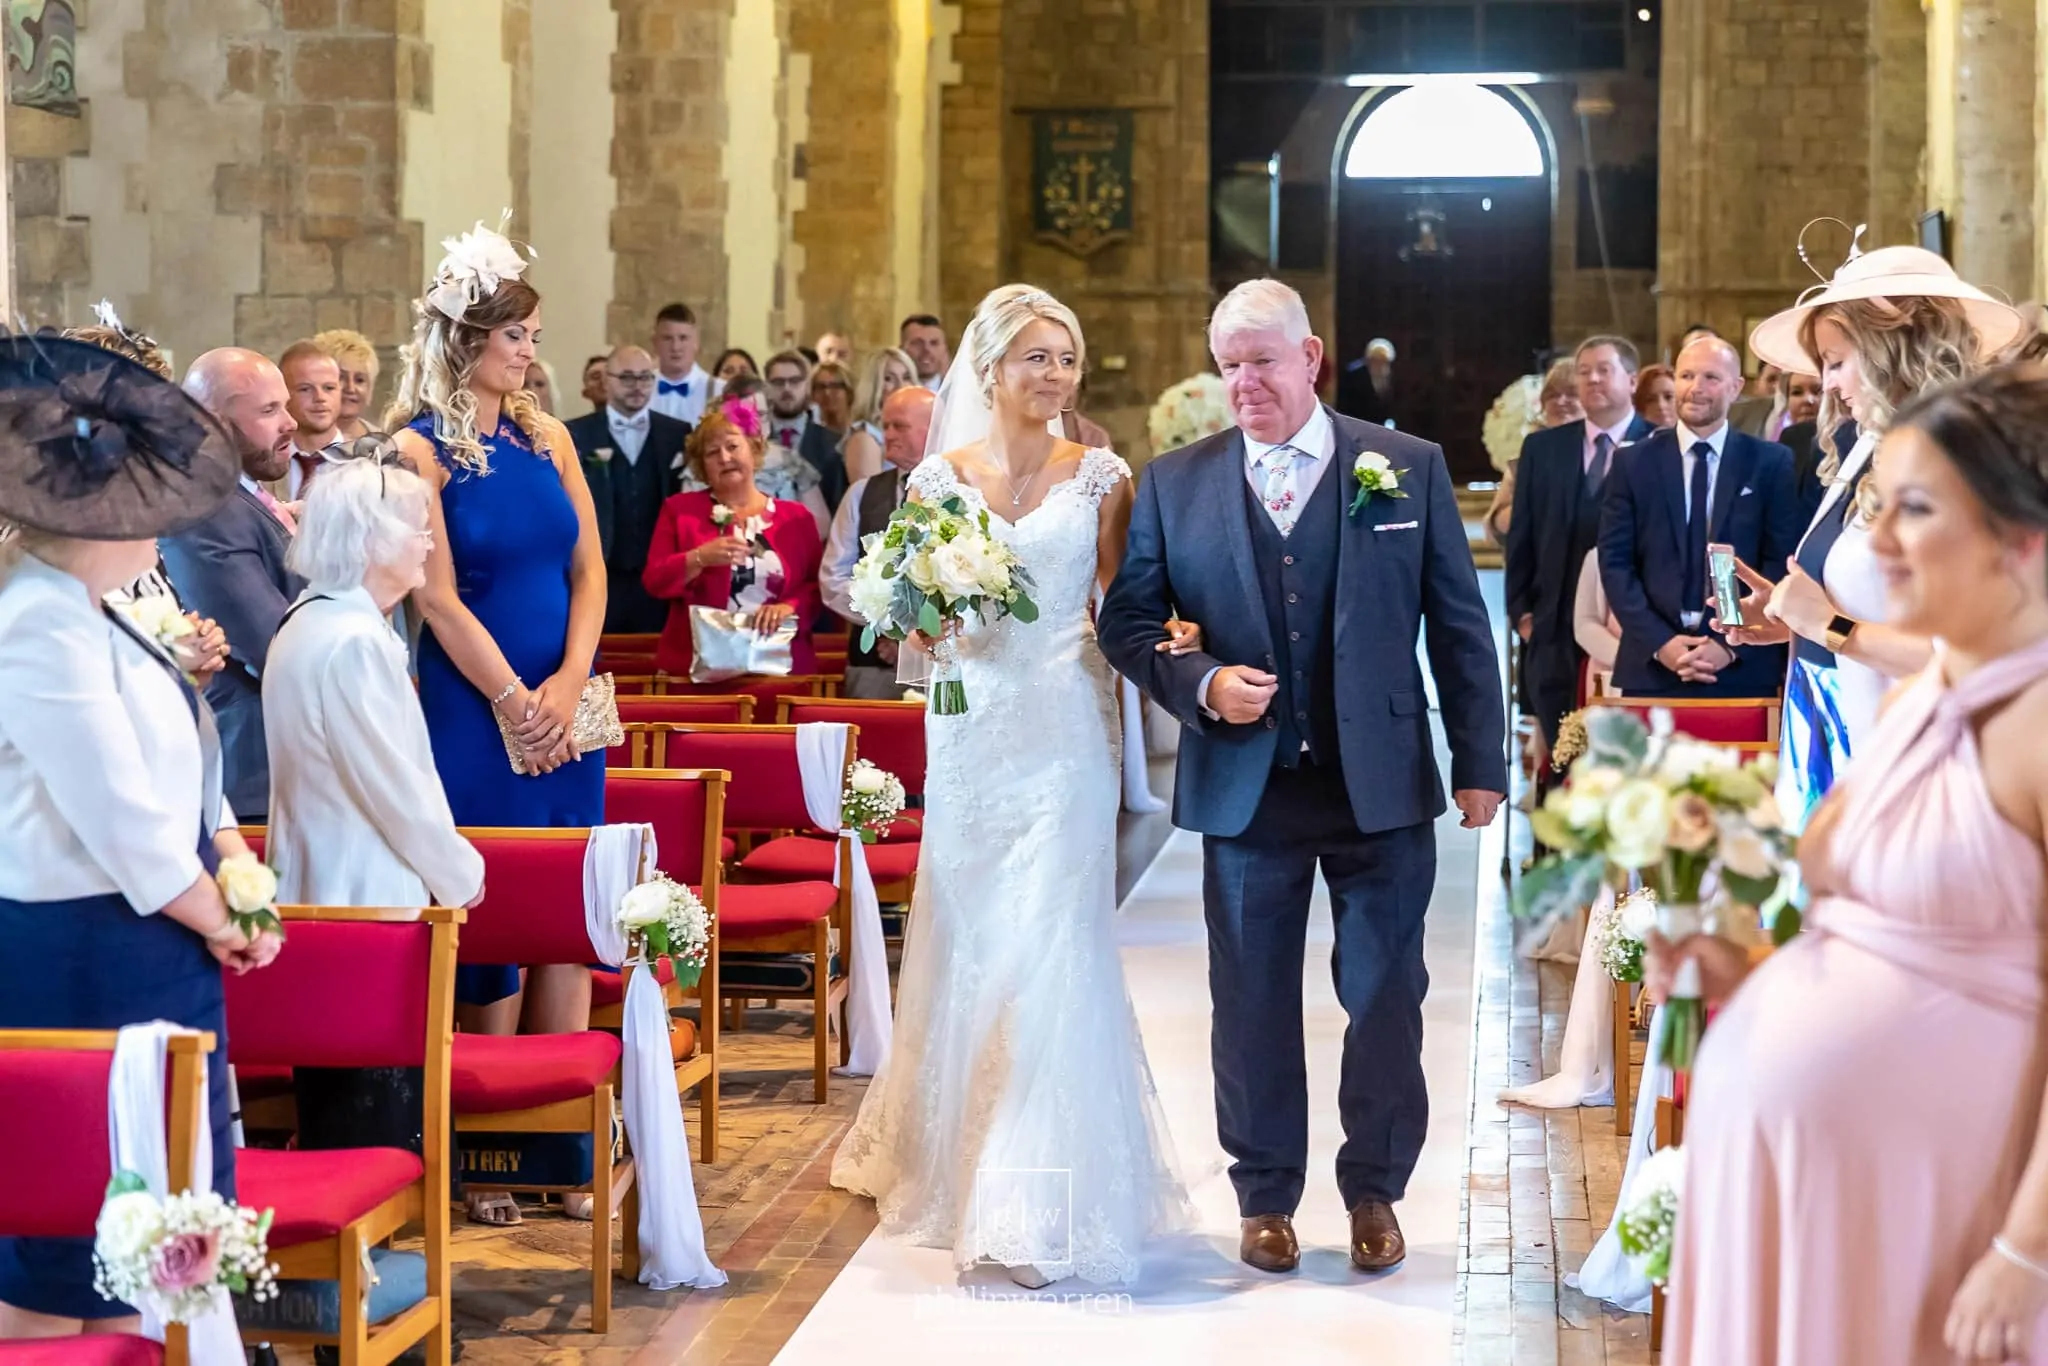 bride and her dad walking down the aisle at st marys church in chepstwo smiling with all the guests standing around them